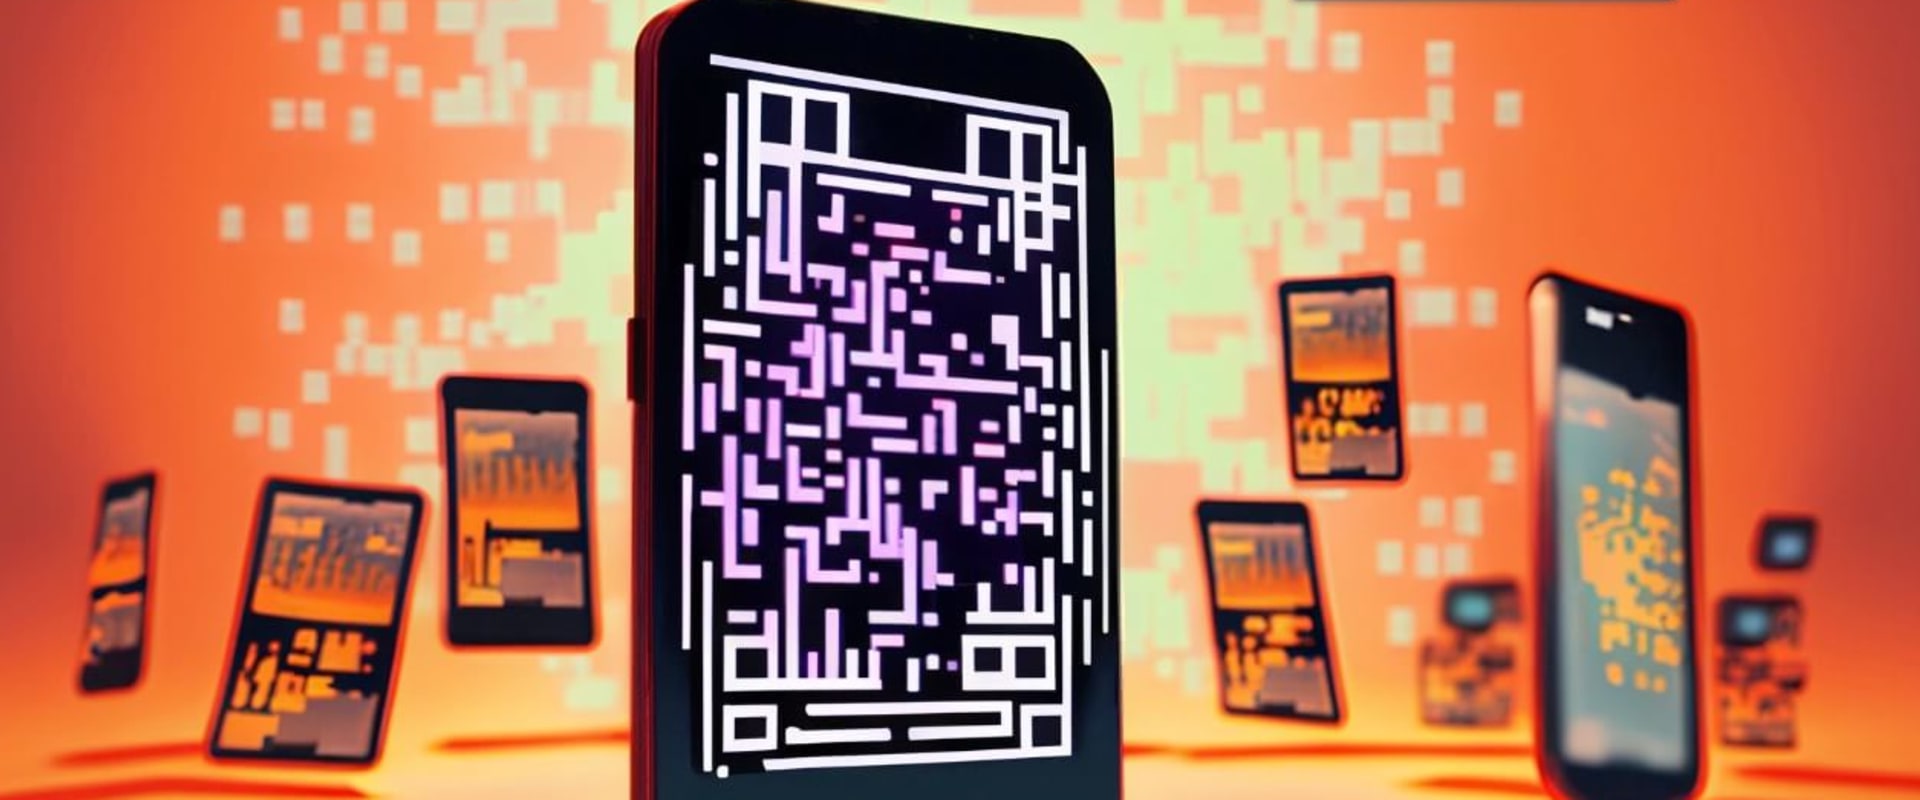 Tips for Successful Mobile Device Scanning of QR Codes